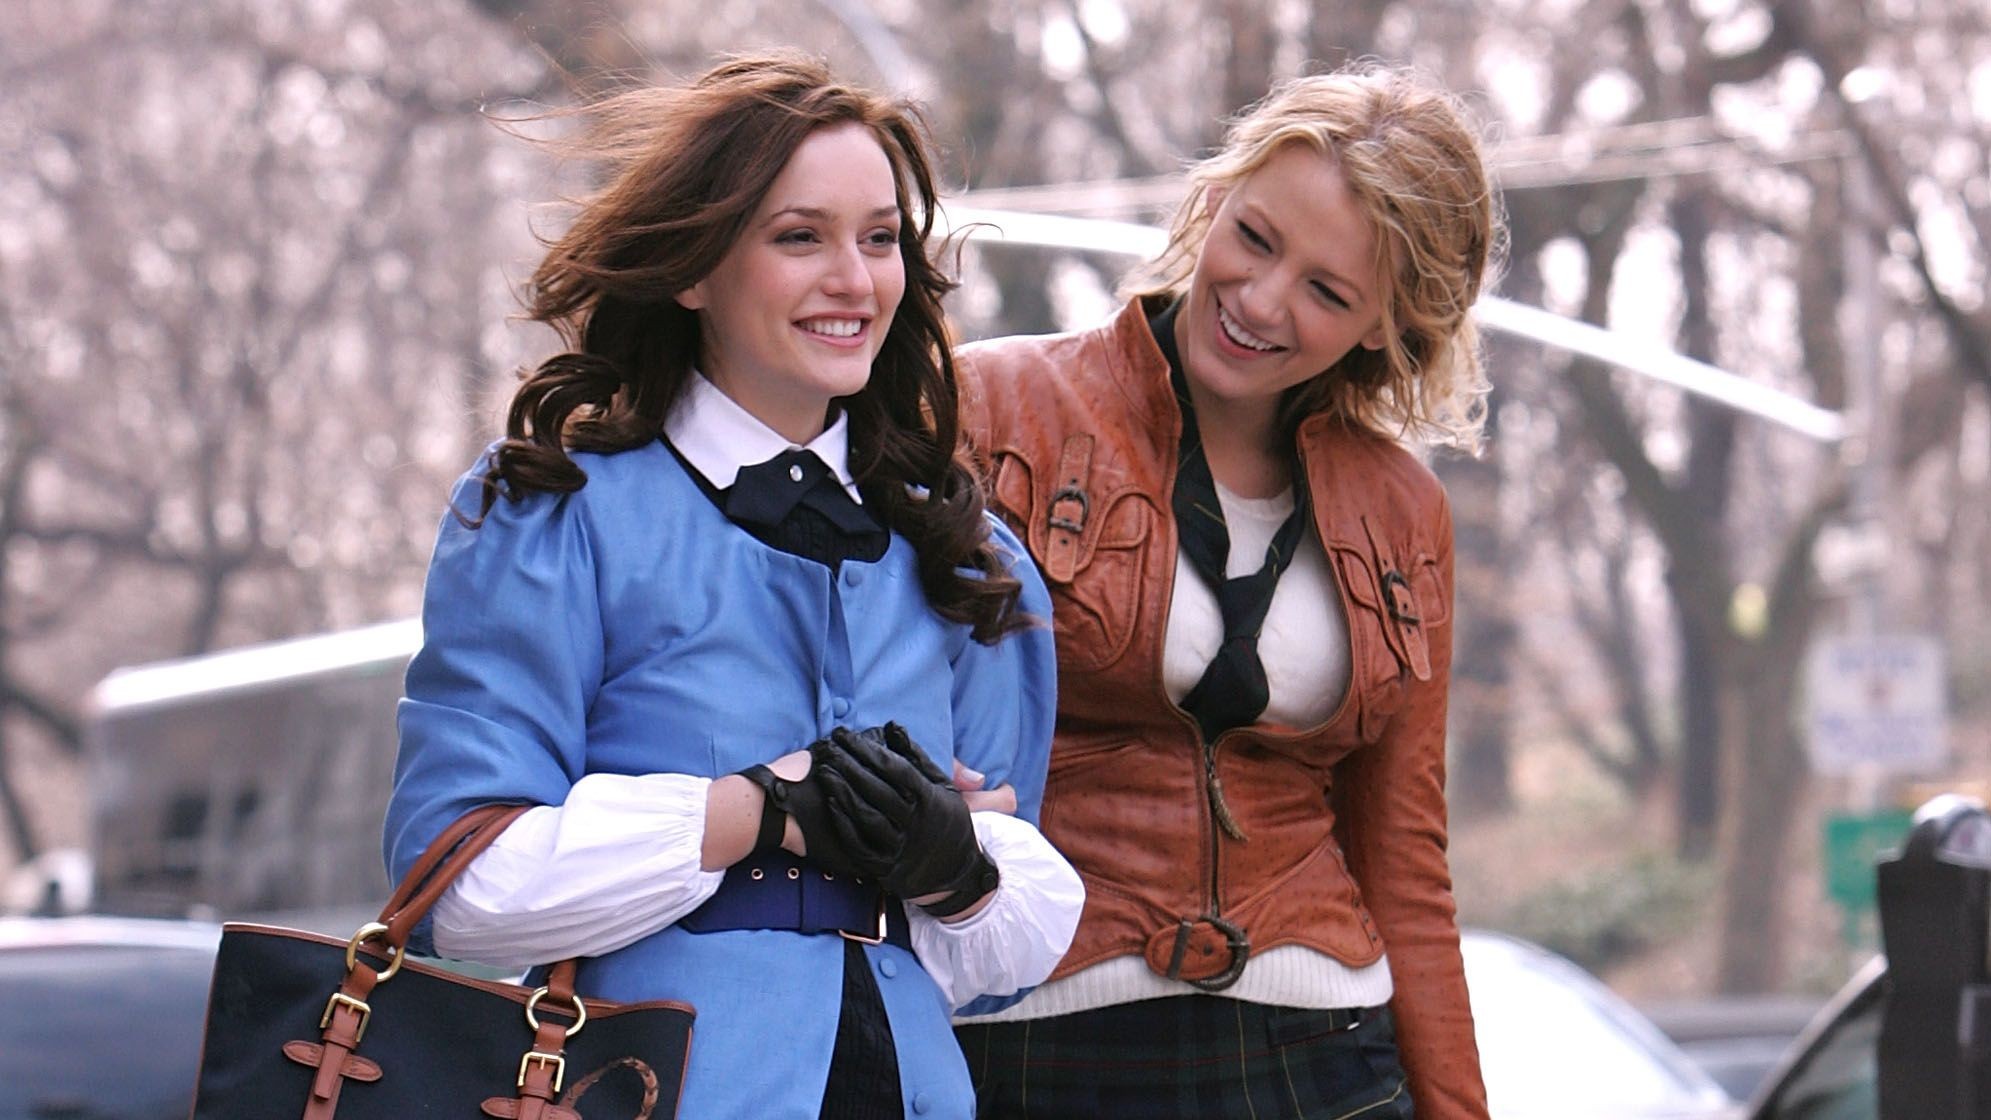 Gossip Girl: New Characters And Their OG Series Counterparts